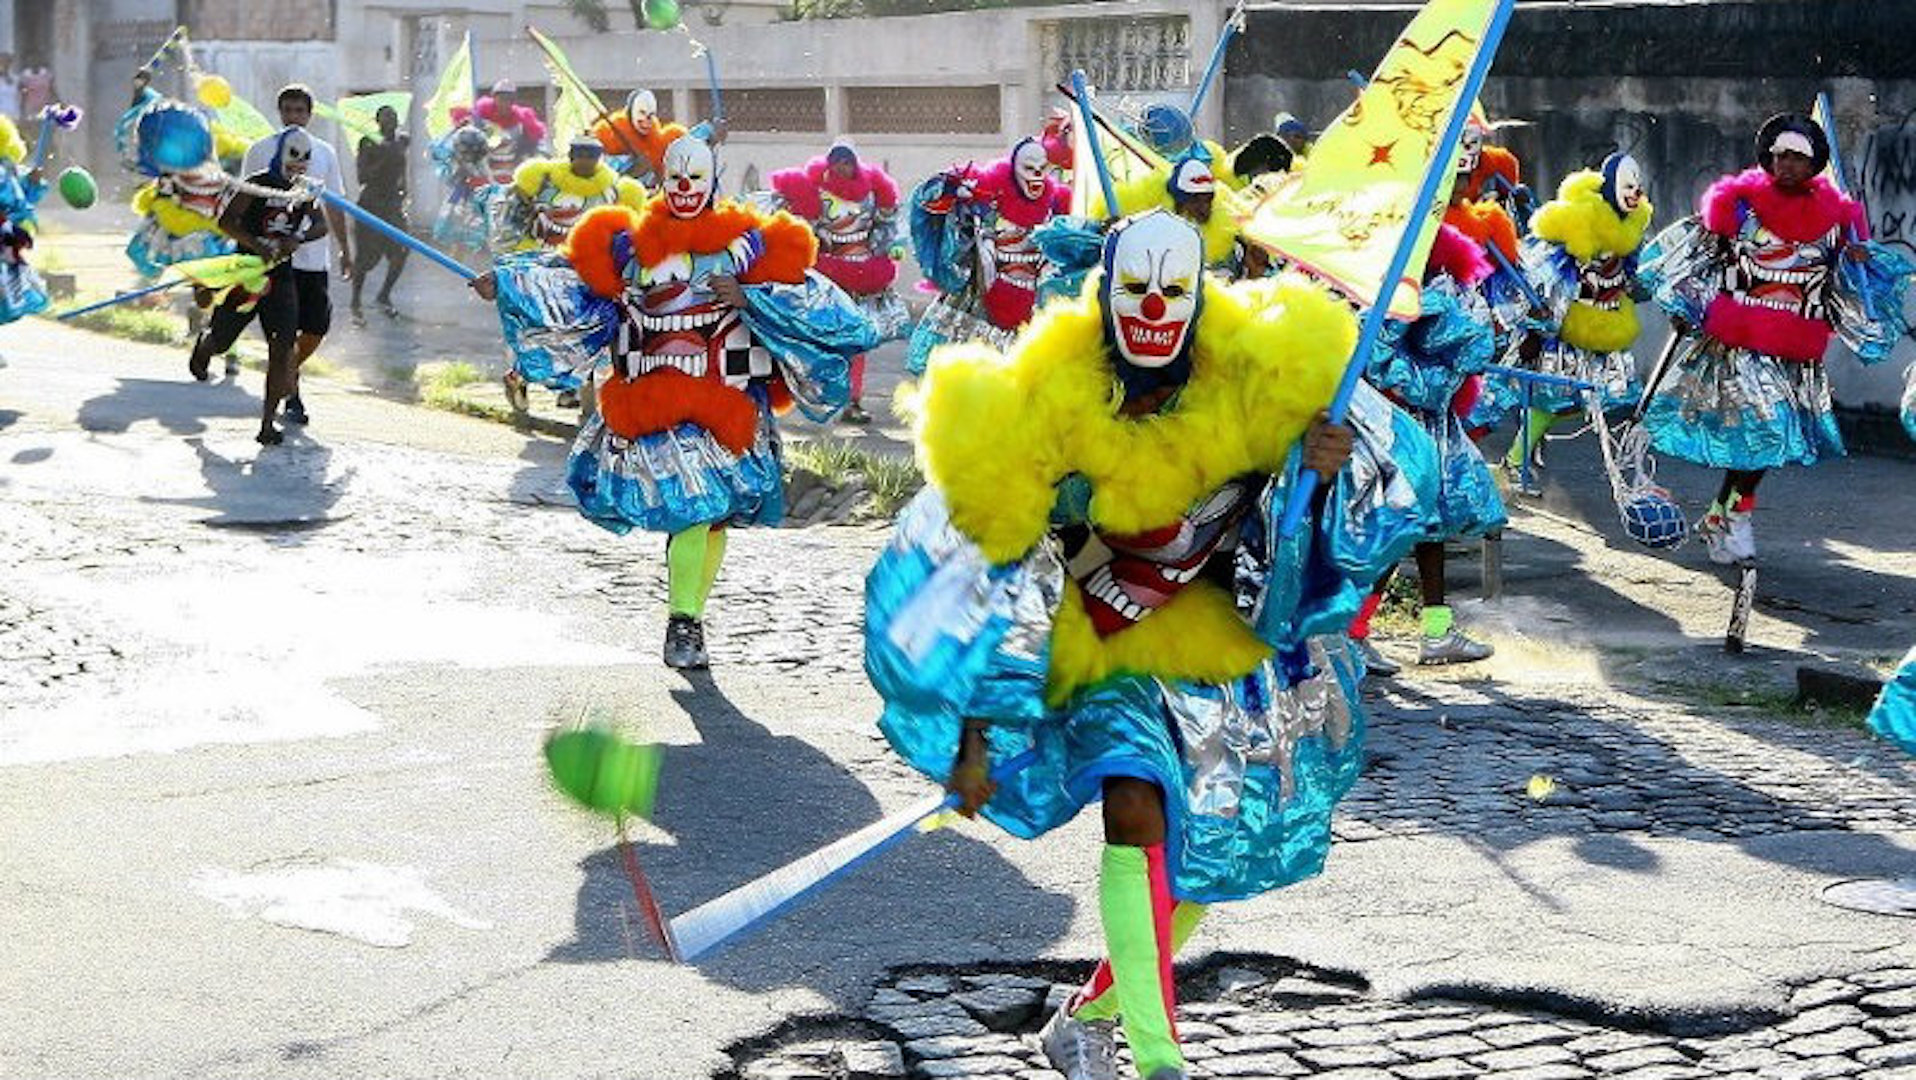 Brazil,Although not always true, Bate-bola groups have a reputation for promoting a violent celebration of Carnival